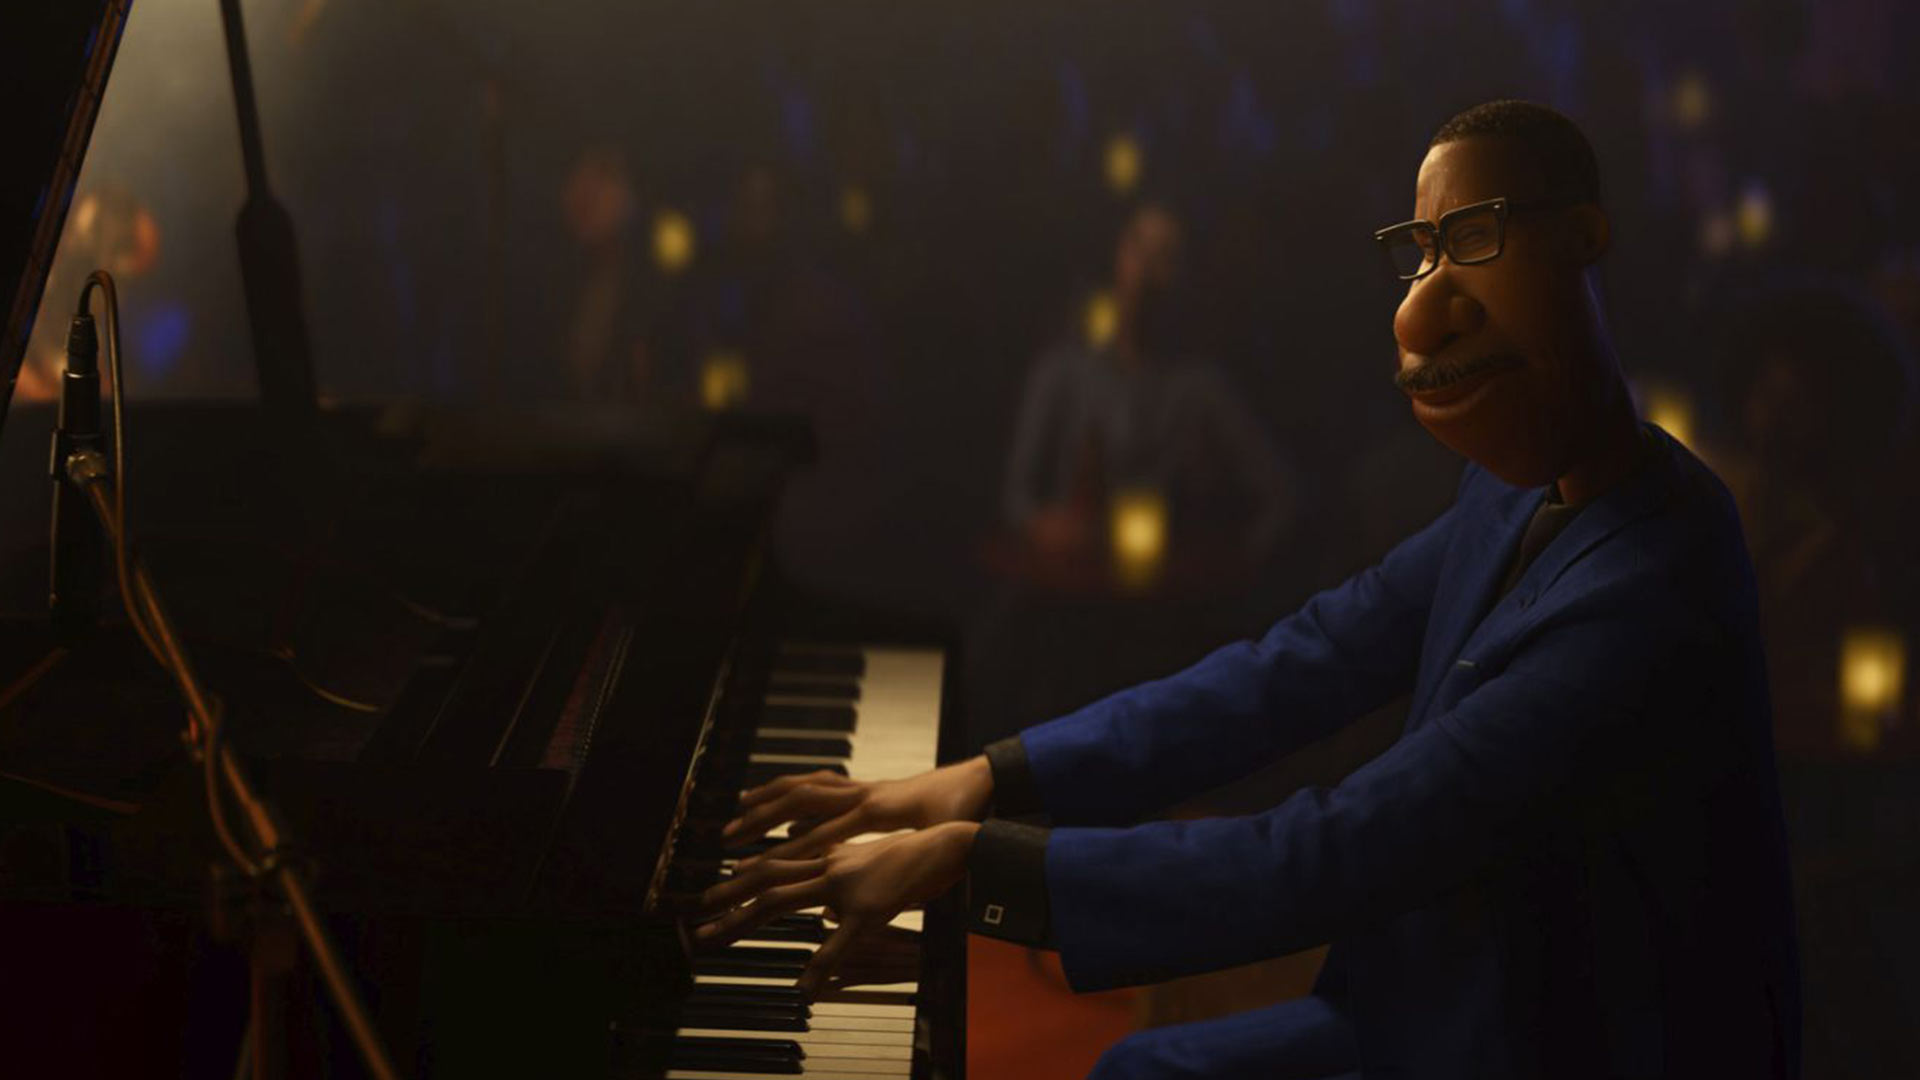 Joe is playing the piano in the soul animation